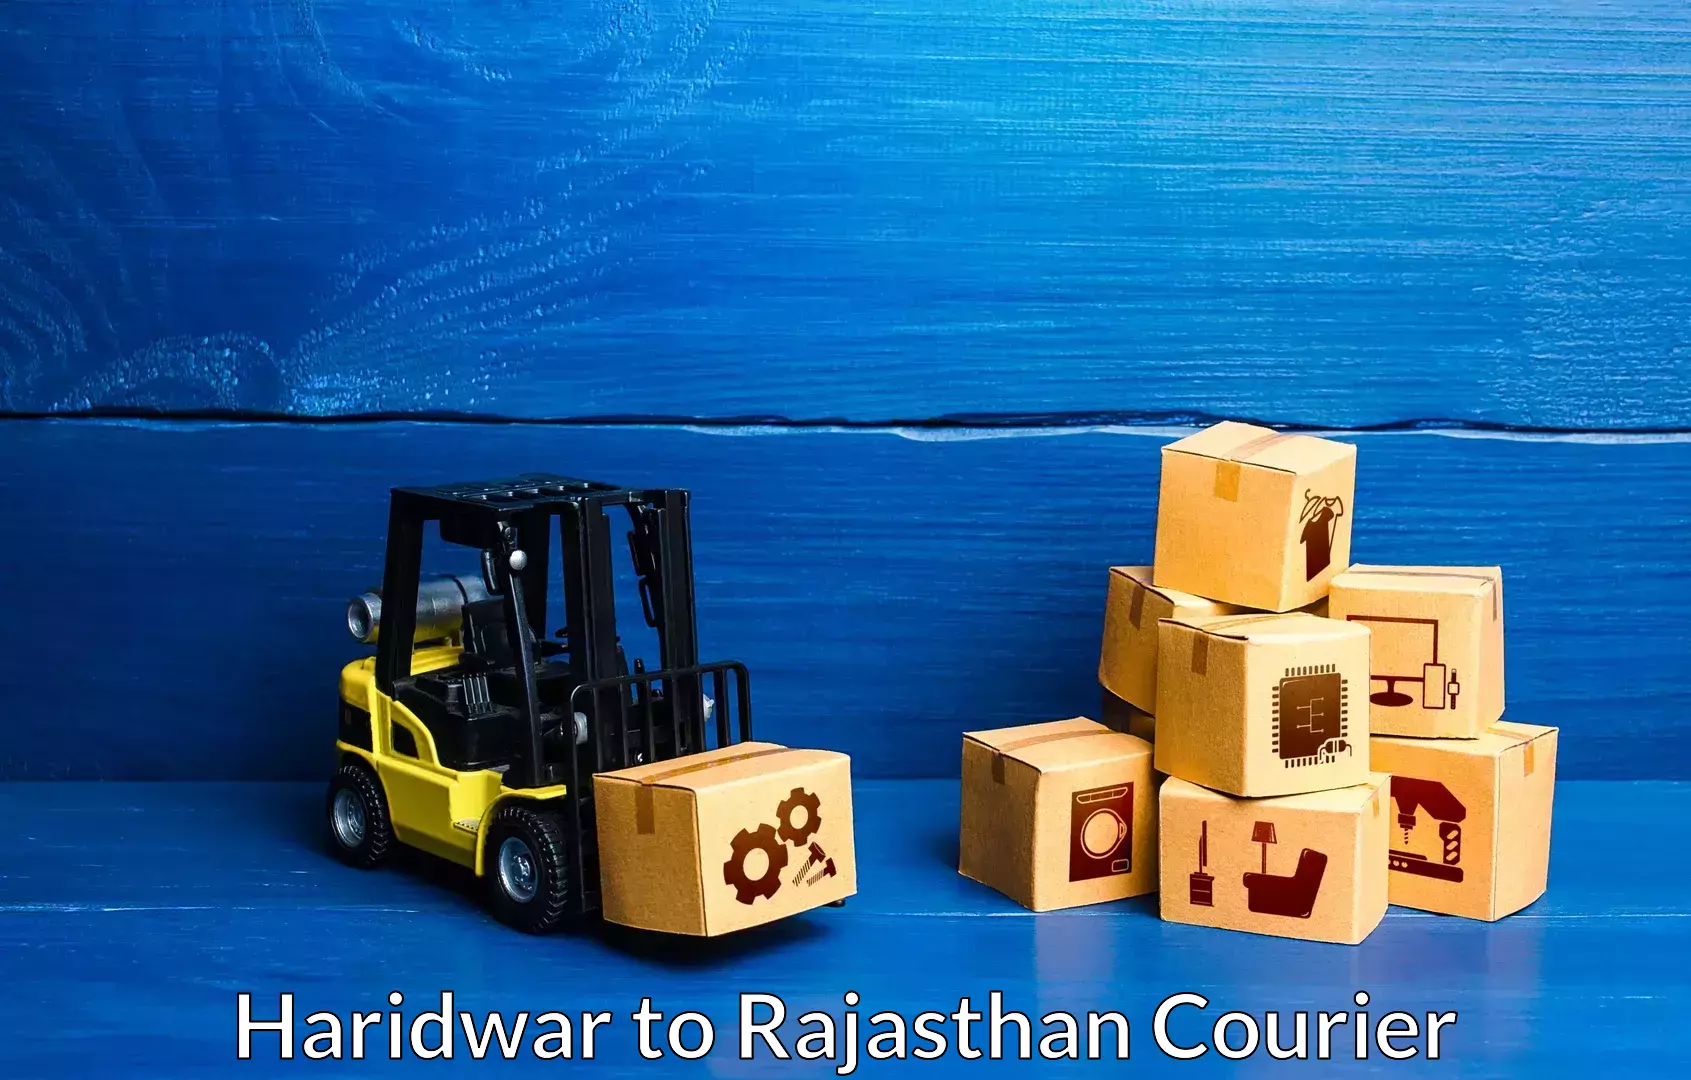 Trusted relocation experts Haridwar to Rajasthan